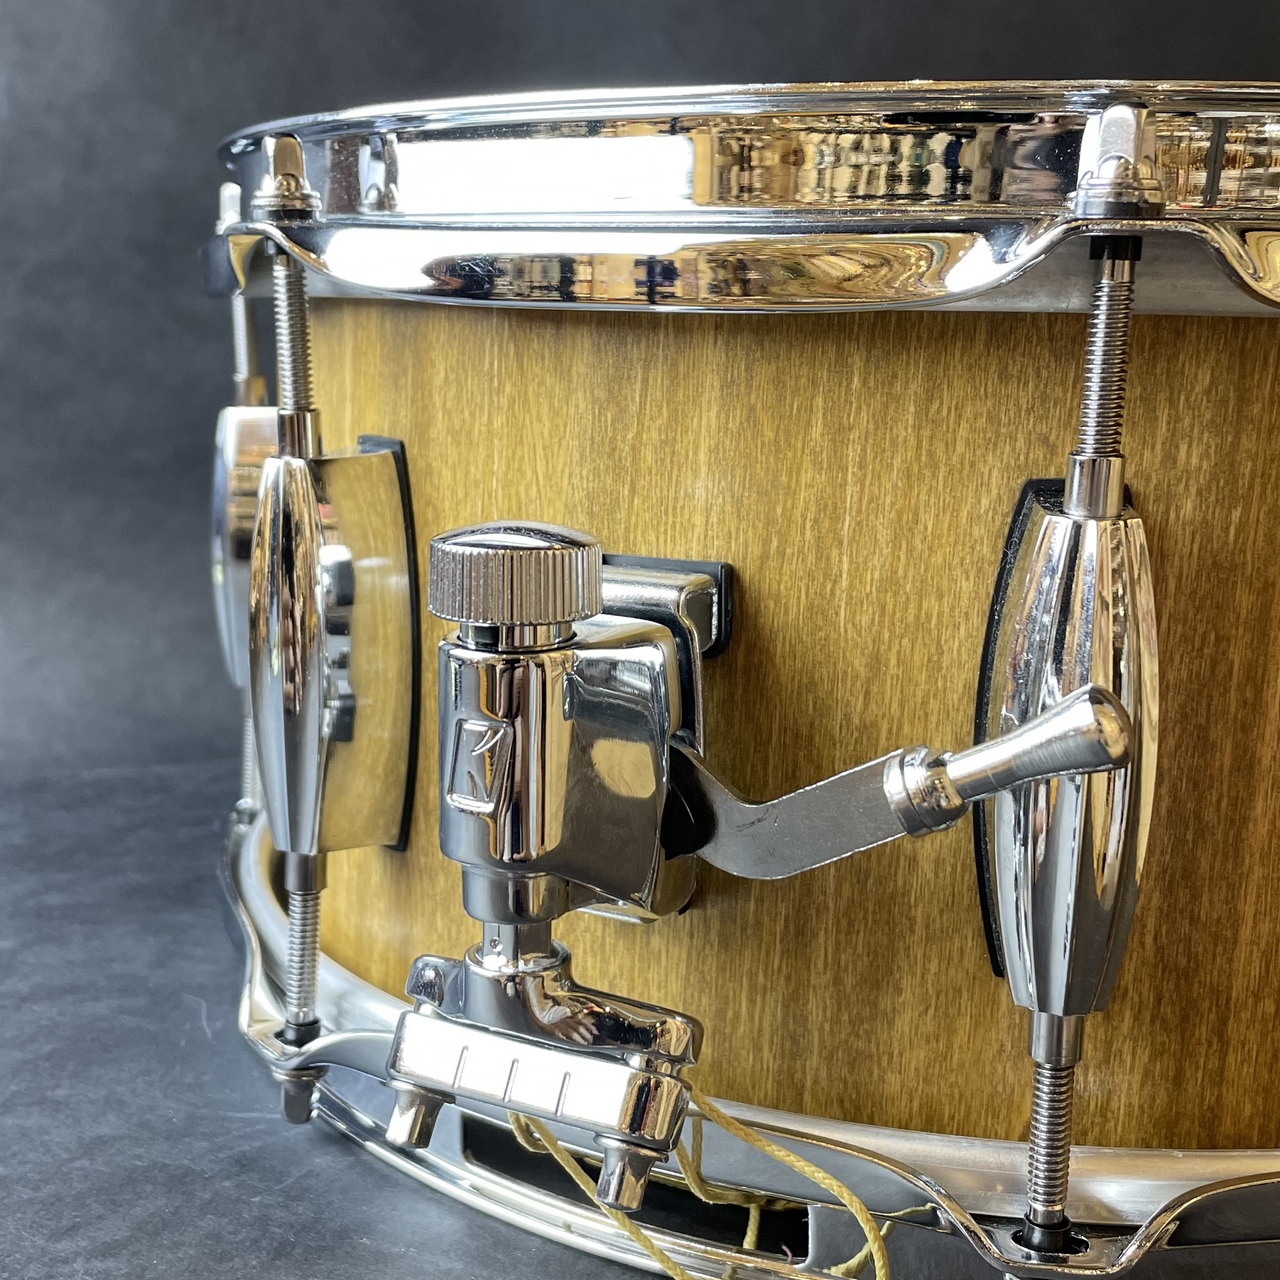 ICD(Inami Custom Drums) Solid Poplar Stave Snare Drum12